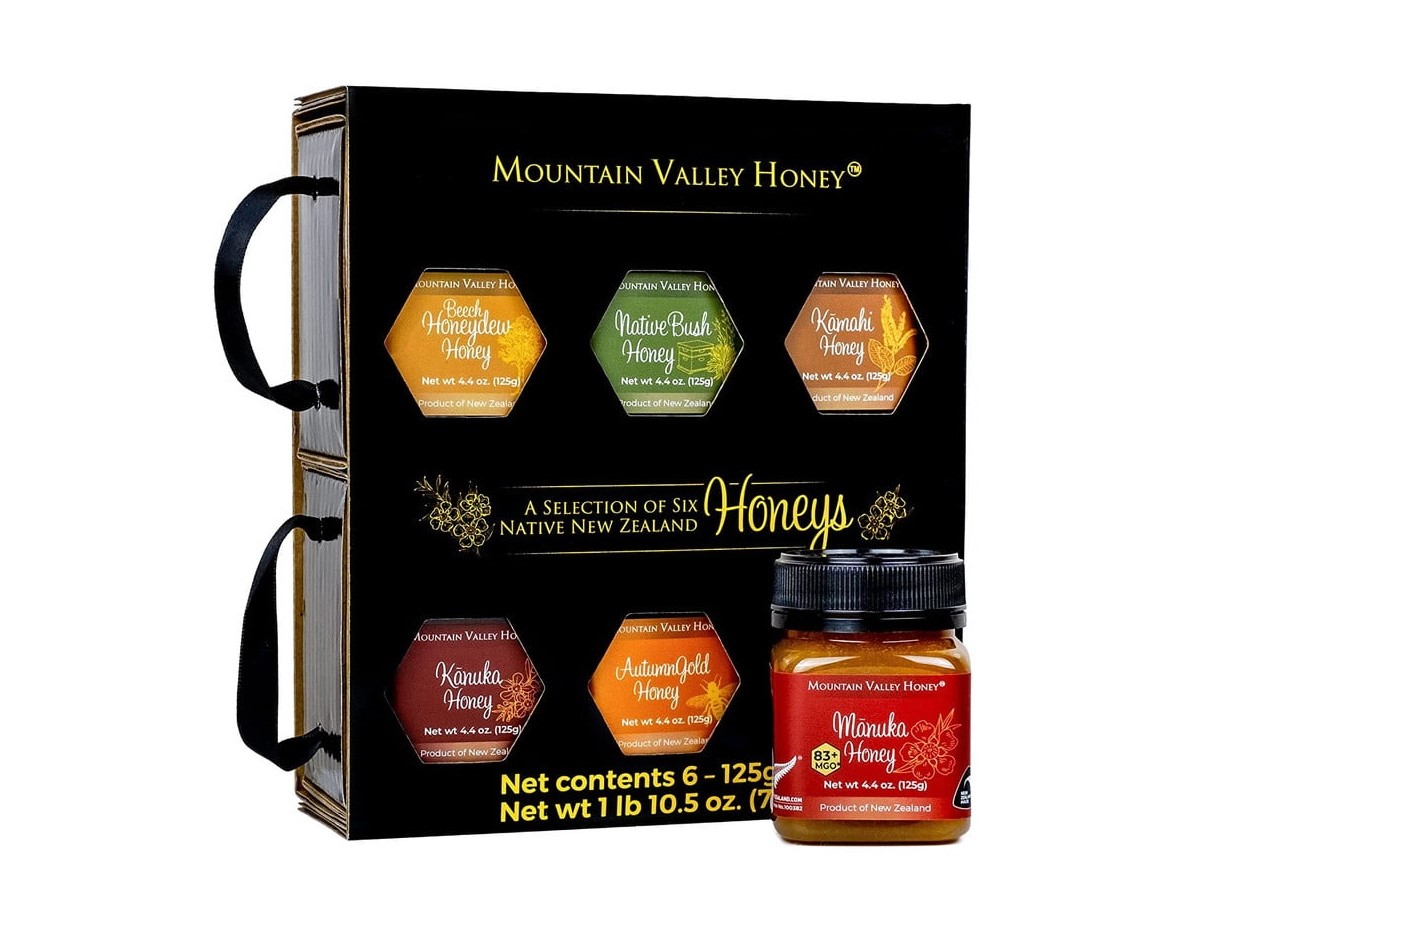 https://www.themanual.com/wp-content/uploads/sites/9/2021/12/mountain-valley-raw-honey-gift-box-set-of-6-with-premium-new-zealand-manuka-honey-mgo-83-pure-natural-honey-collection-6-x-4-4oz-pots-perfect-gourmet-food-gift-for-families.jpg?fit=800%2C800&p=1